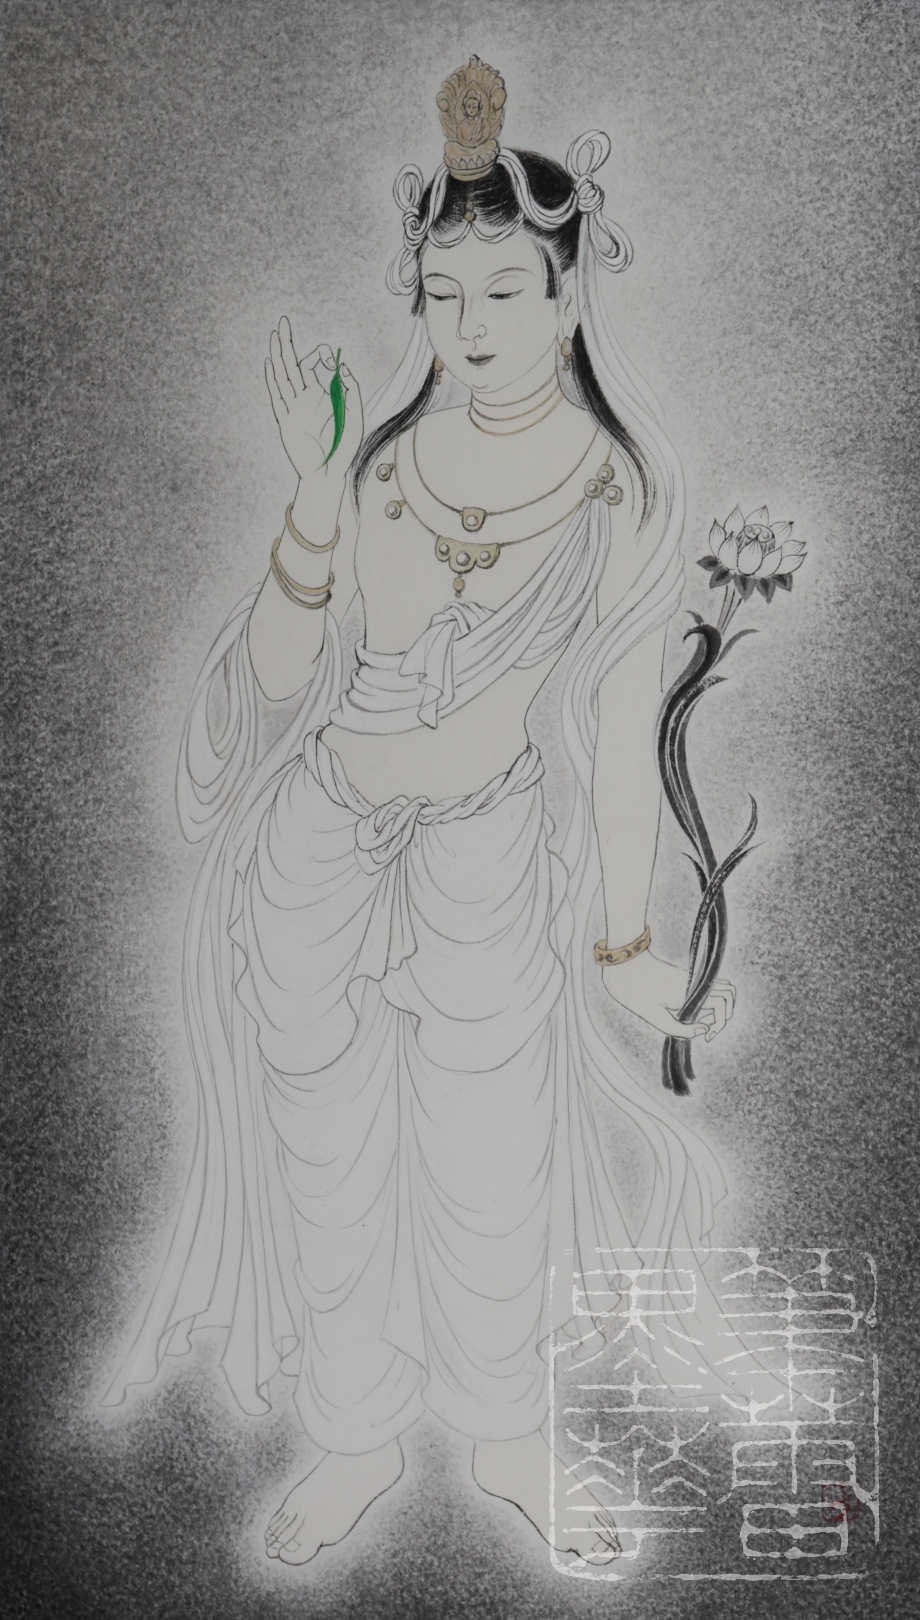 <i>Ryuuyou Kannon</i> (柳葉観音) is one of the thirty-three forms of <i>Kannon bosatsu</i> (Guanyin), holding a leaf of the willow tree (Salix spp.), which naturally yields salicylic acid (cf. aspirin) and used as medicine.  